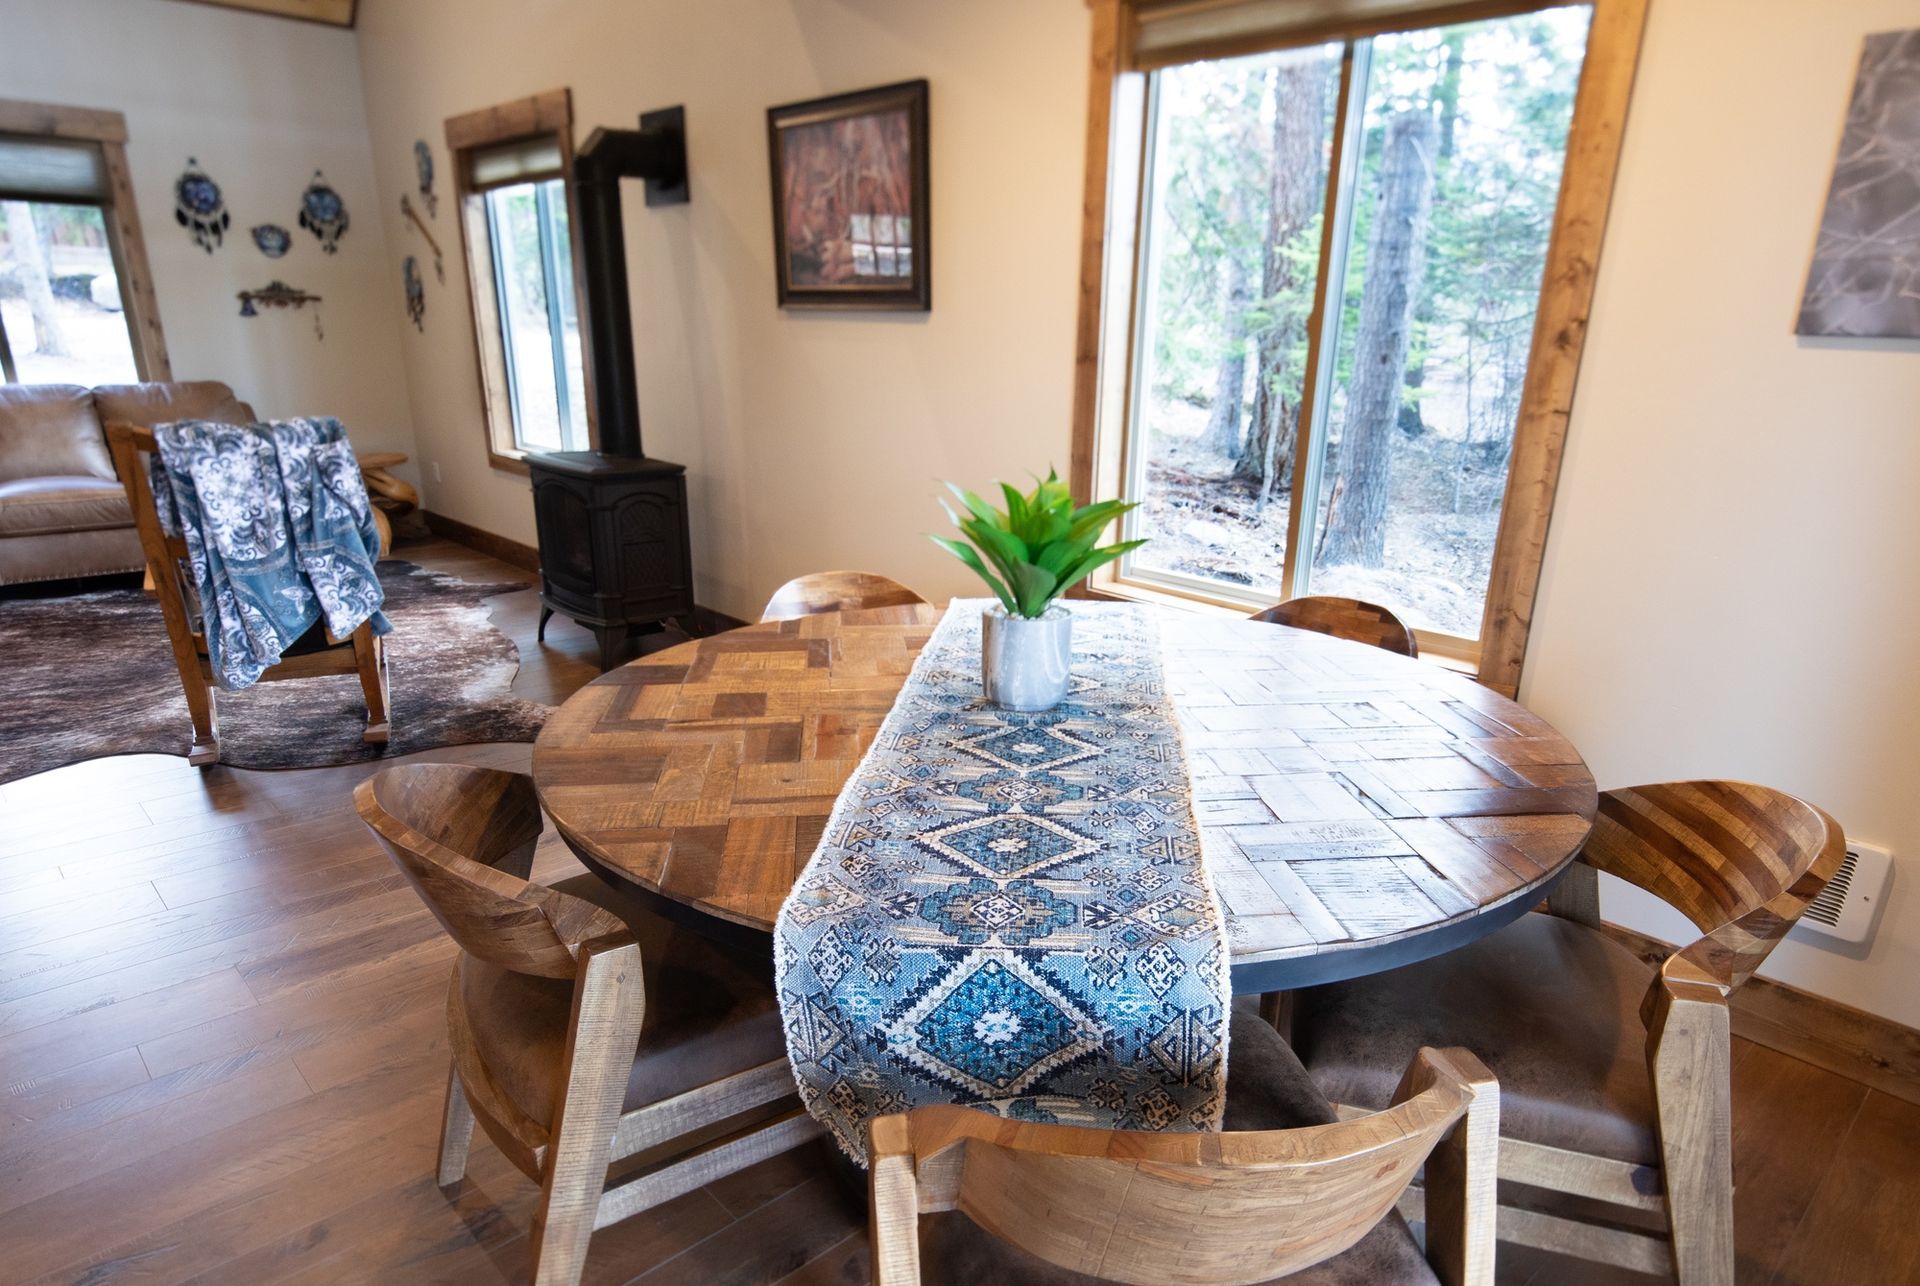 A dining room table with a blue table runner and chairs in a house.